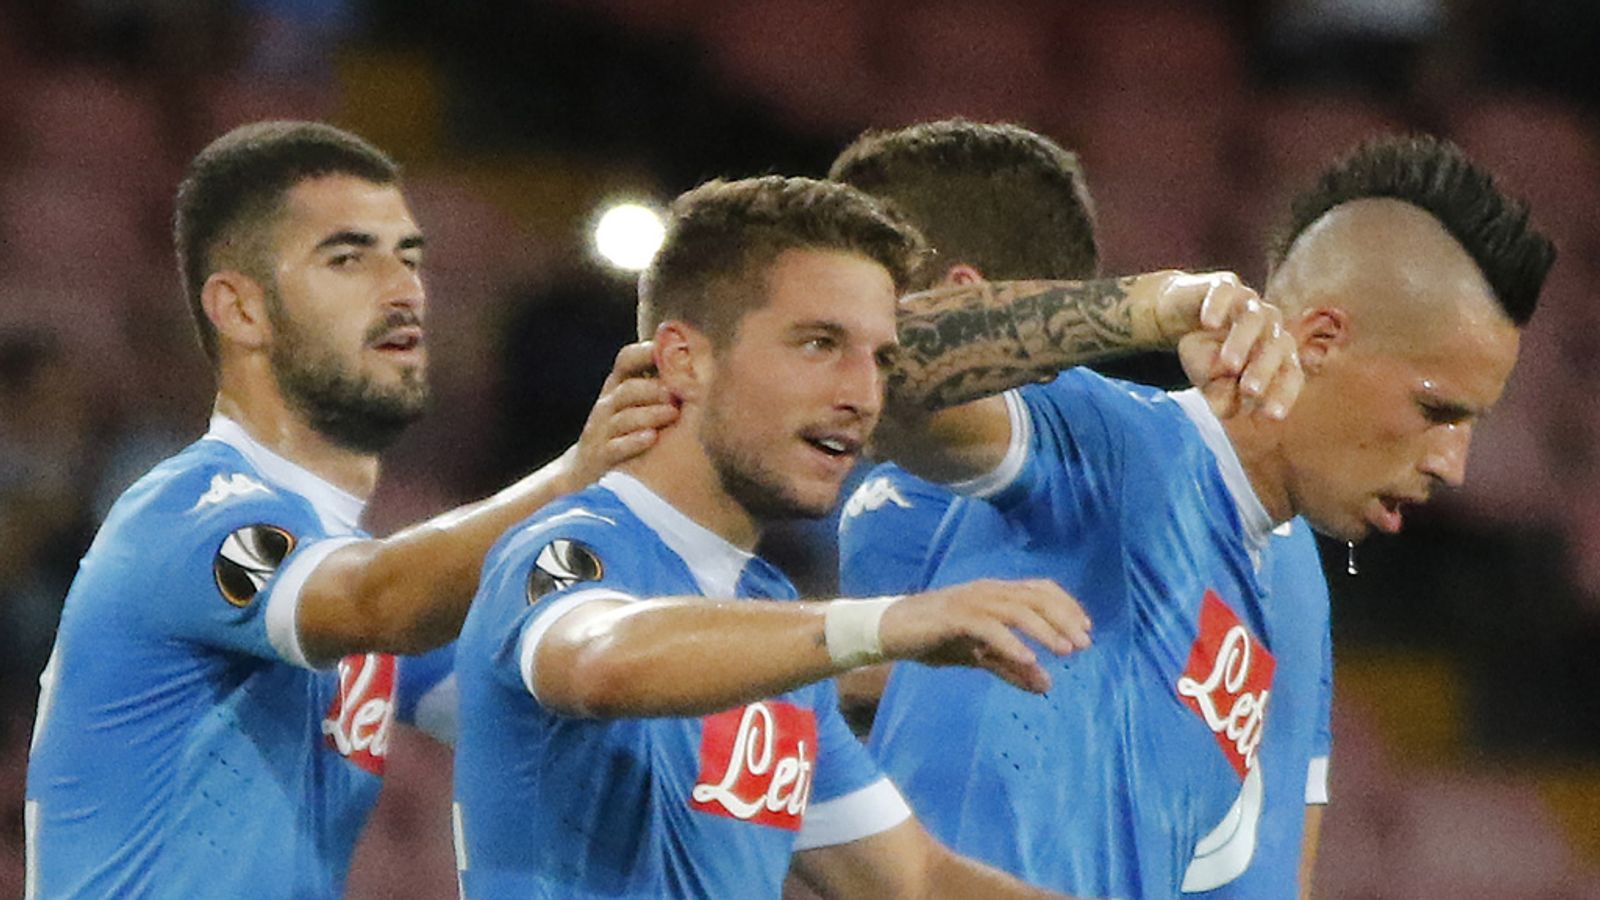 Europa League round-up: Napoli hit five past Club Brugge | Football ...